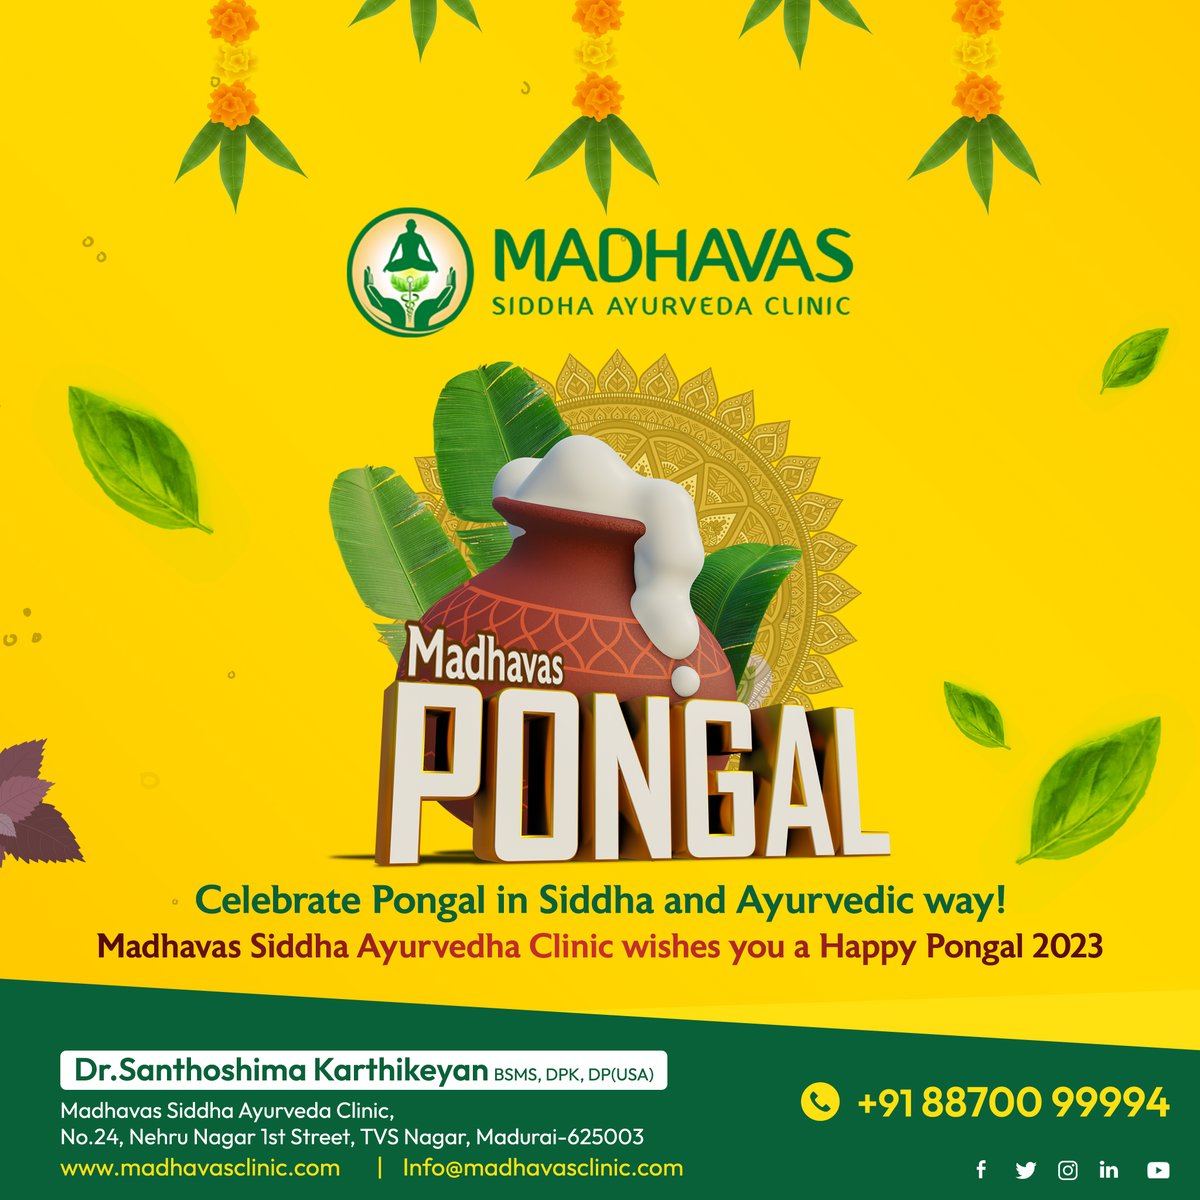 Madhavas Siddha Ayurvedha Clinic wishes you a and your family a very Happy Pongal 2023

#ayurvedic #ayurvedicmedicine #ayurvedictreatment #ayurvedicproducts #ayurvedicherbs #ayurvediclife #ayurvedichealing #ayurvedictips #siddha #pongal #happypongal